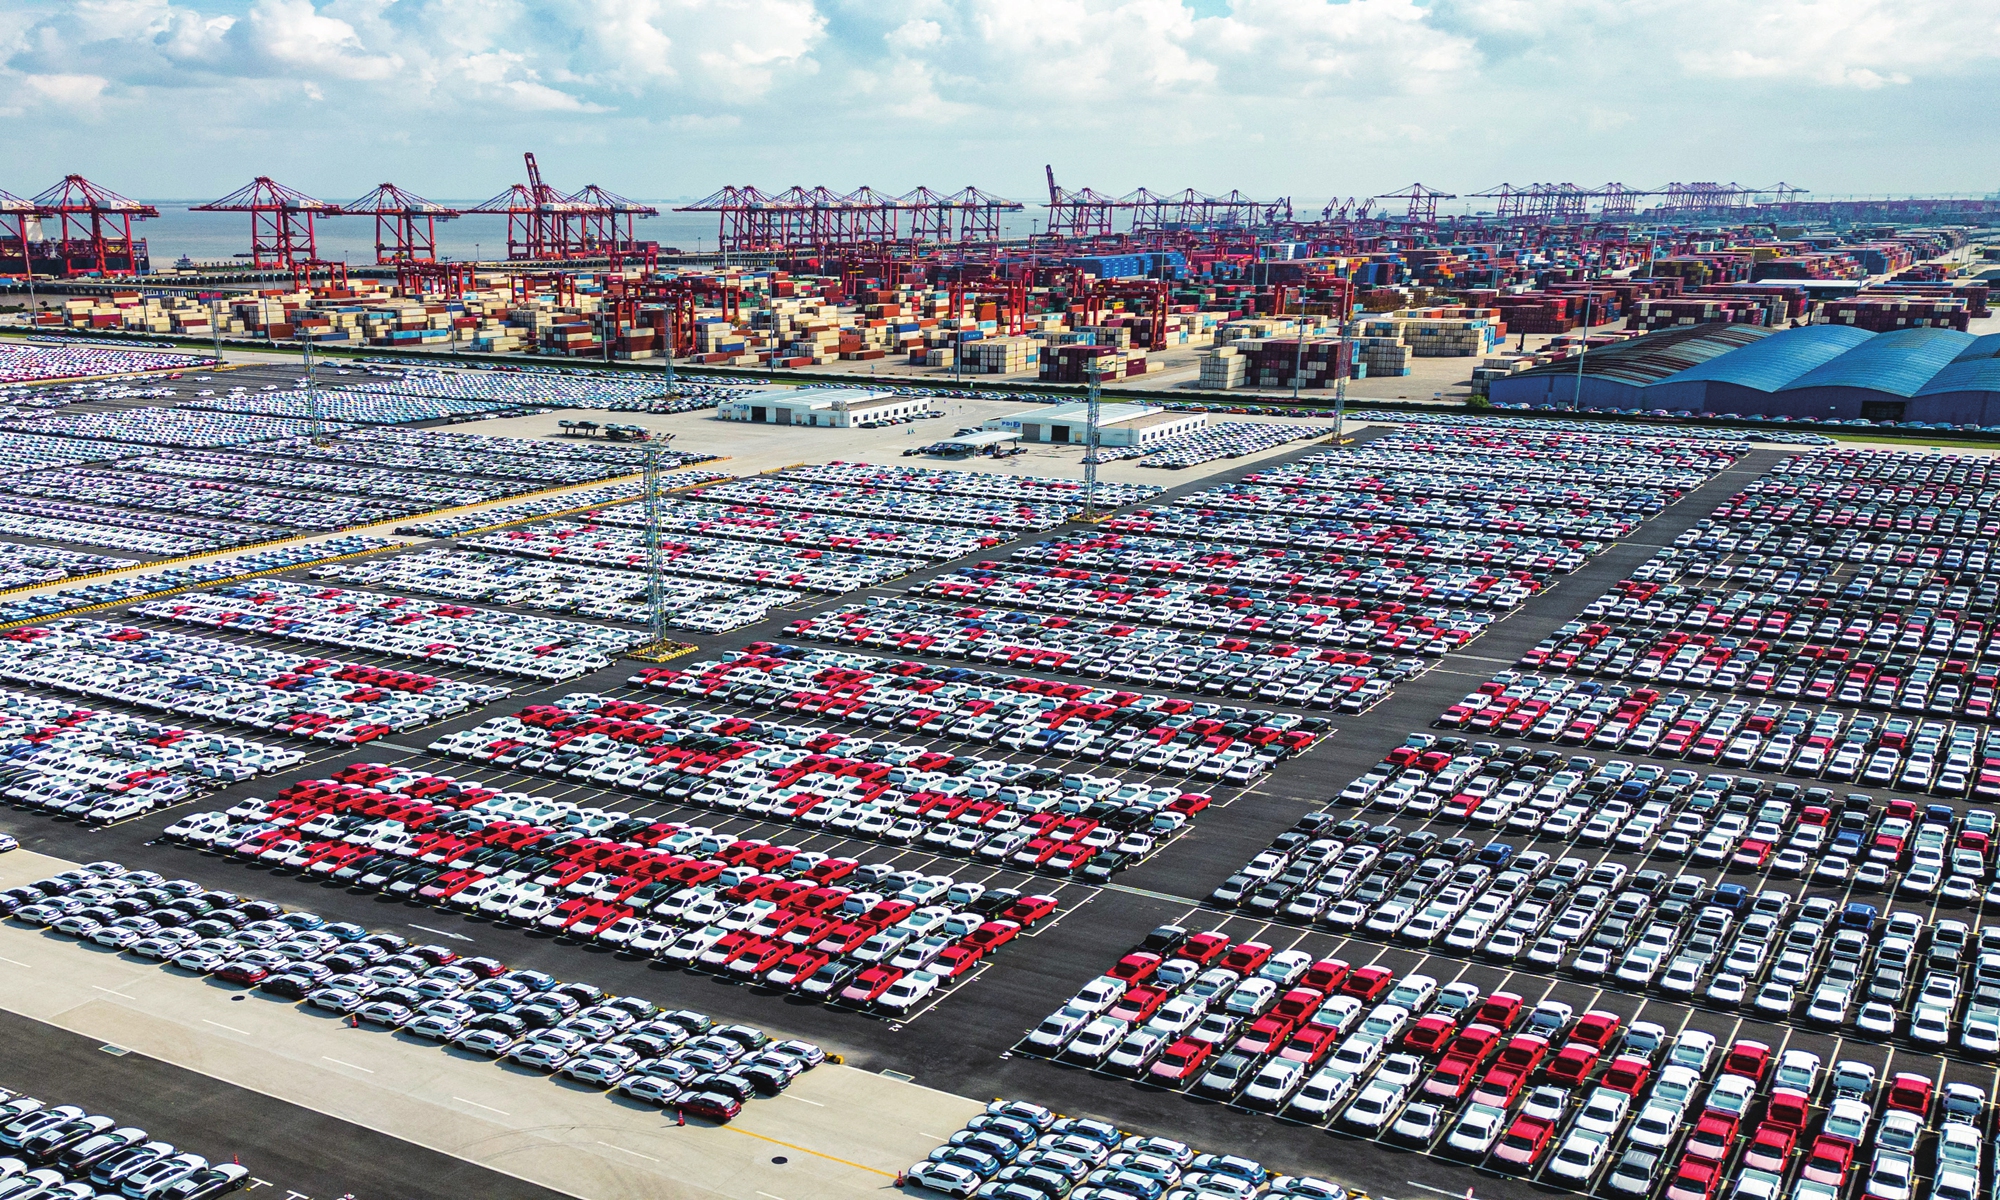 Automobiles are ready to be exported from the Taicang Port, East China’s Jiangsu Province, on October 31, 2022. Cars handled by the port from January to September reached 218,700, of which 60,700 were exported. The car throughput in September reached 33,700, with 22,500 being exported, hitting a record high. Photo: cnsphoto. 